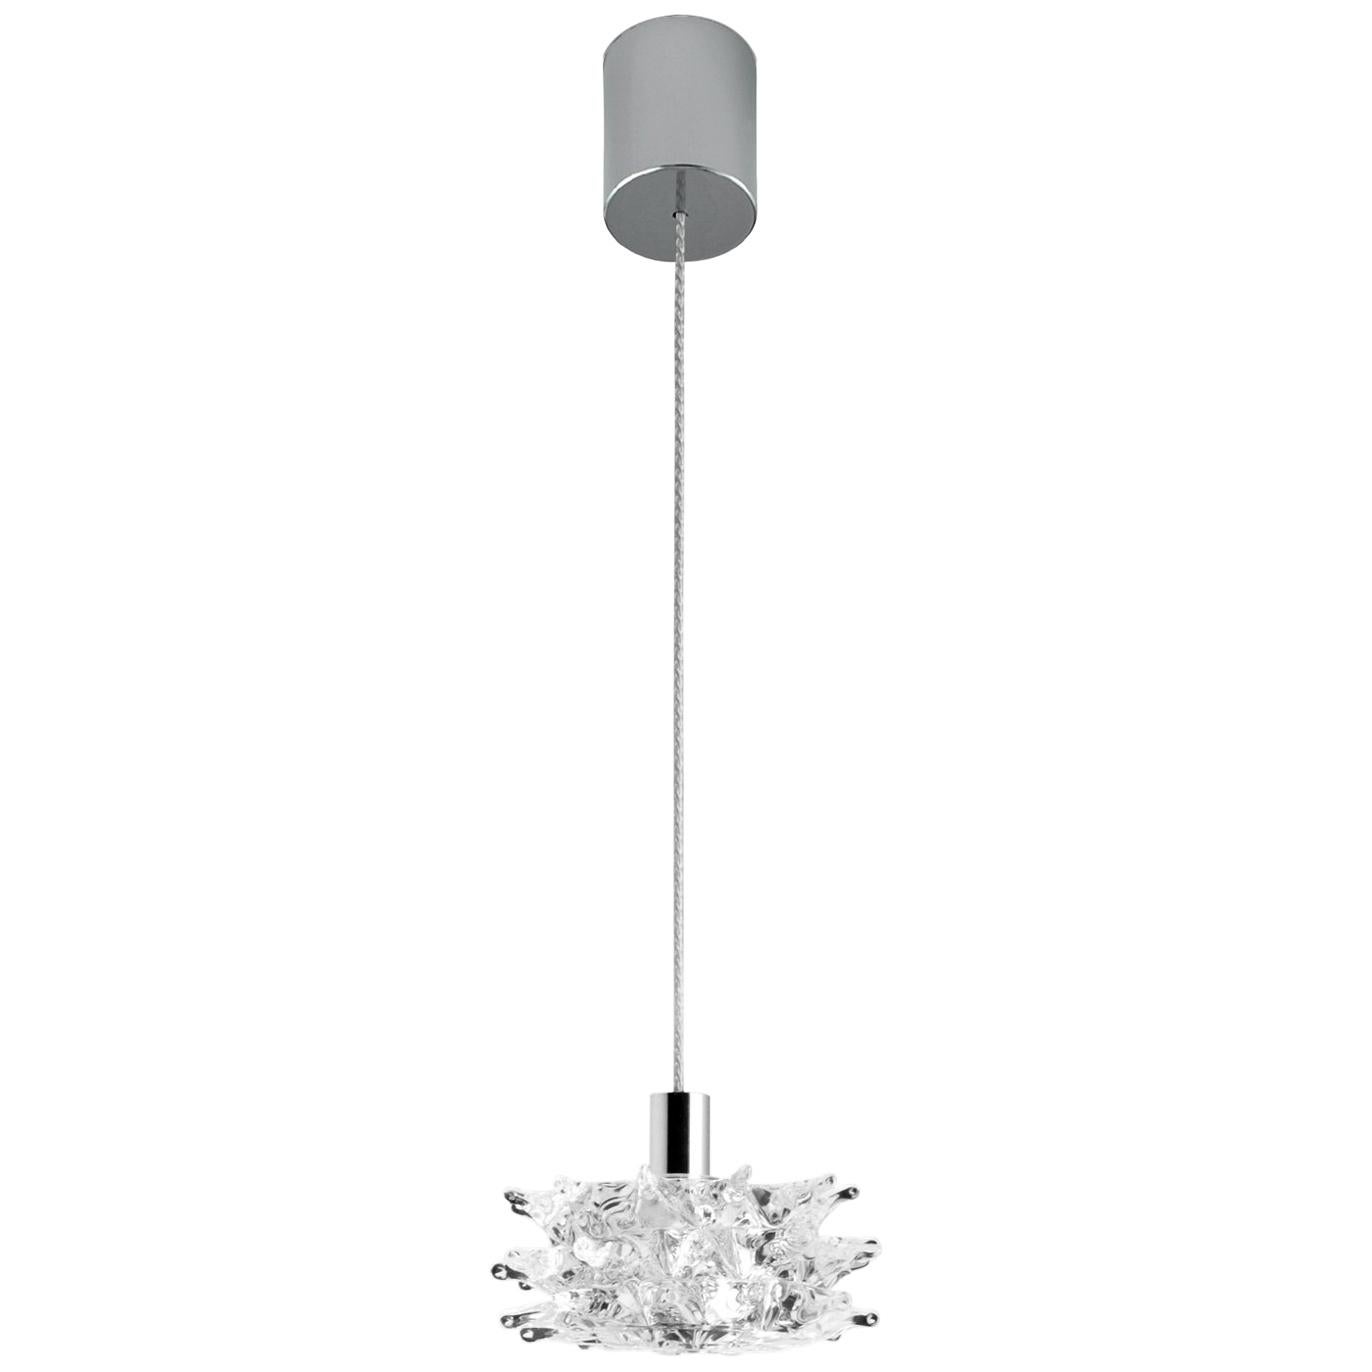 Leucos Kuk S G9 Pendant Light in Transparent & Chrome by Paolo Crepax  For Sale